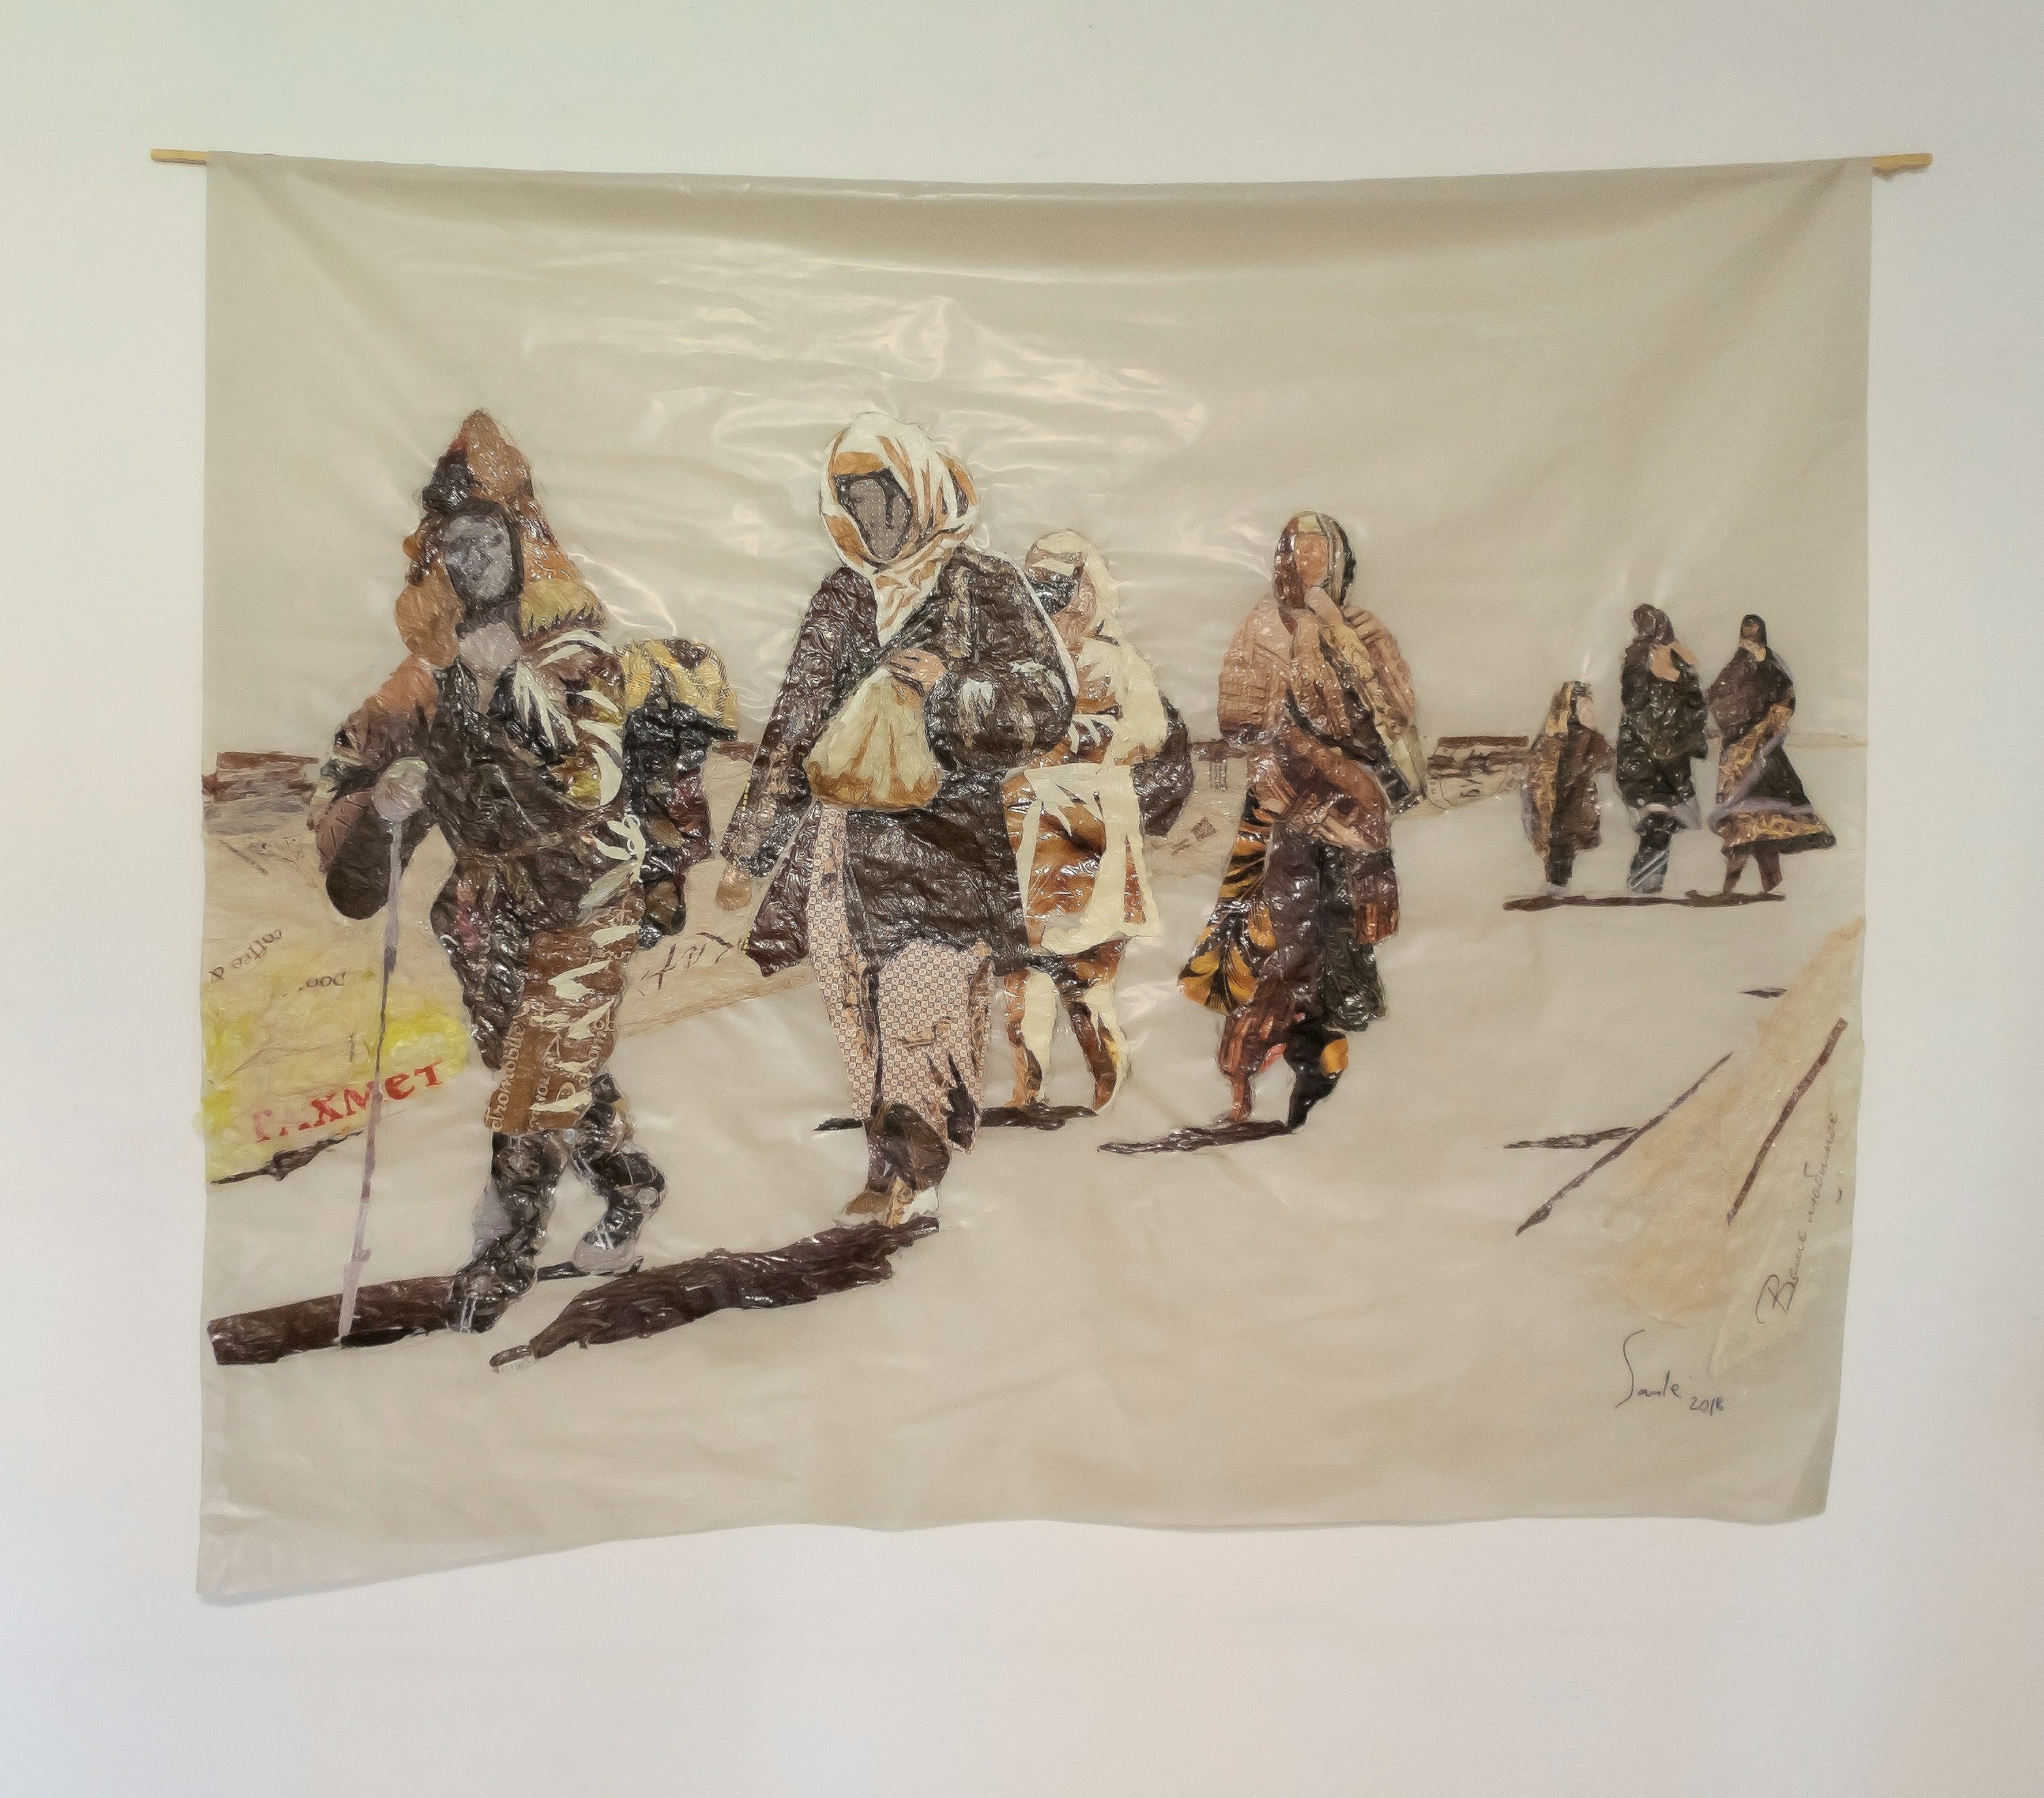 An artwork depicting figures walking on a path.